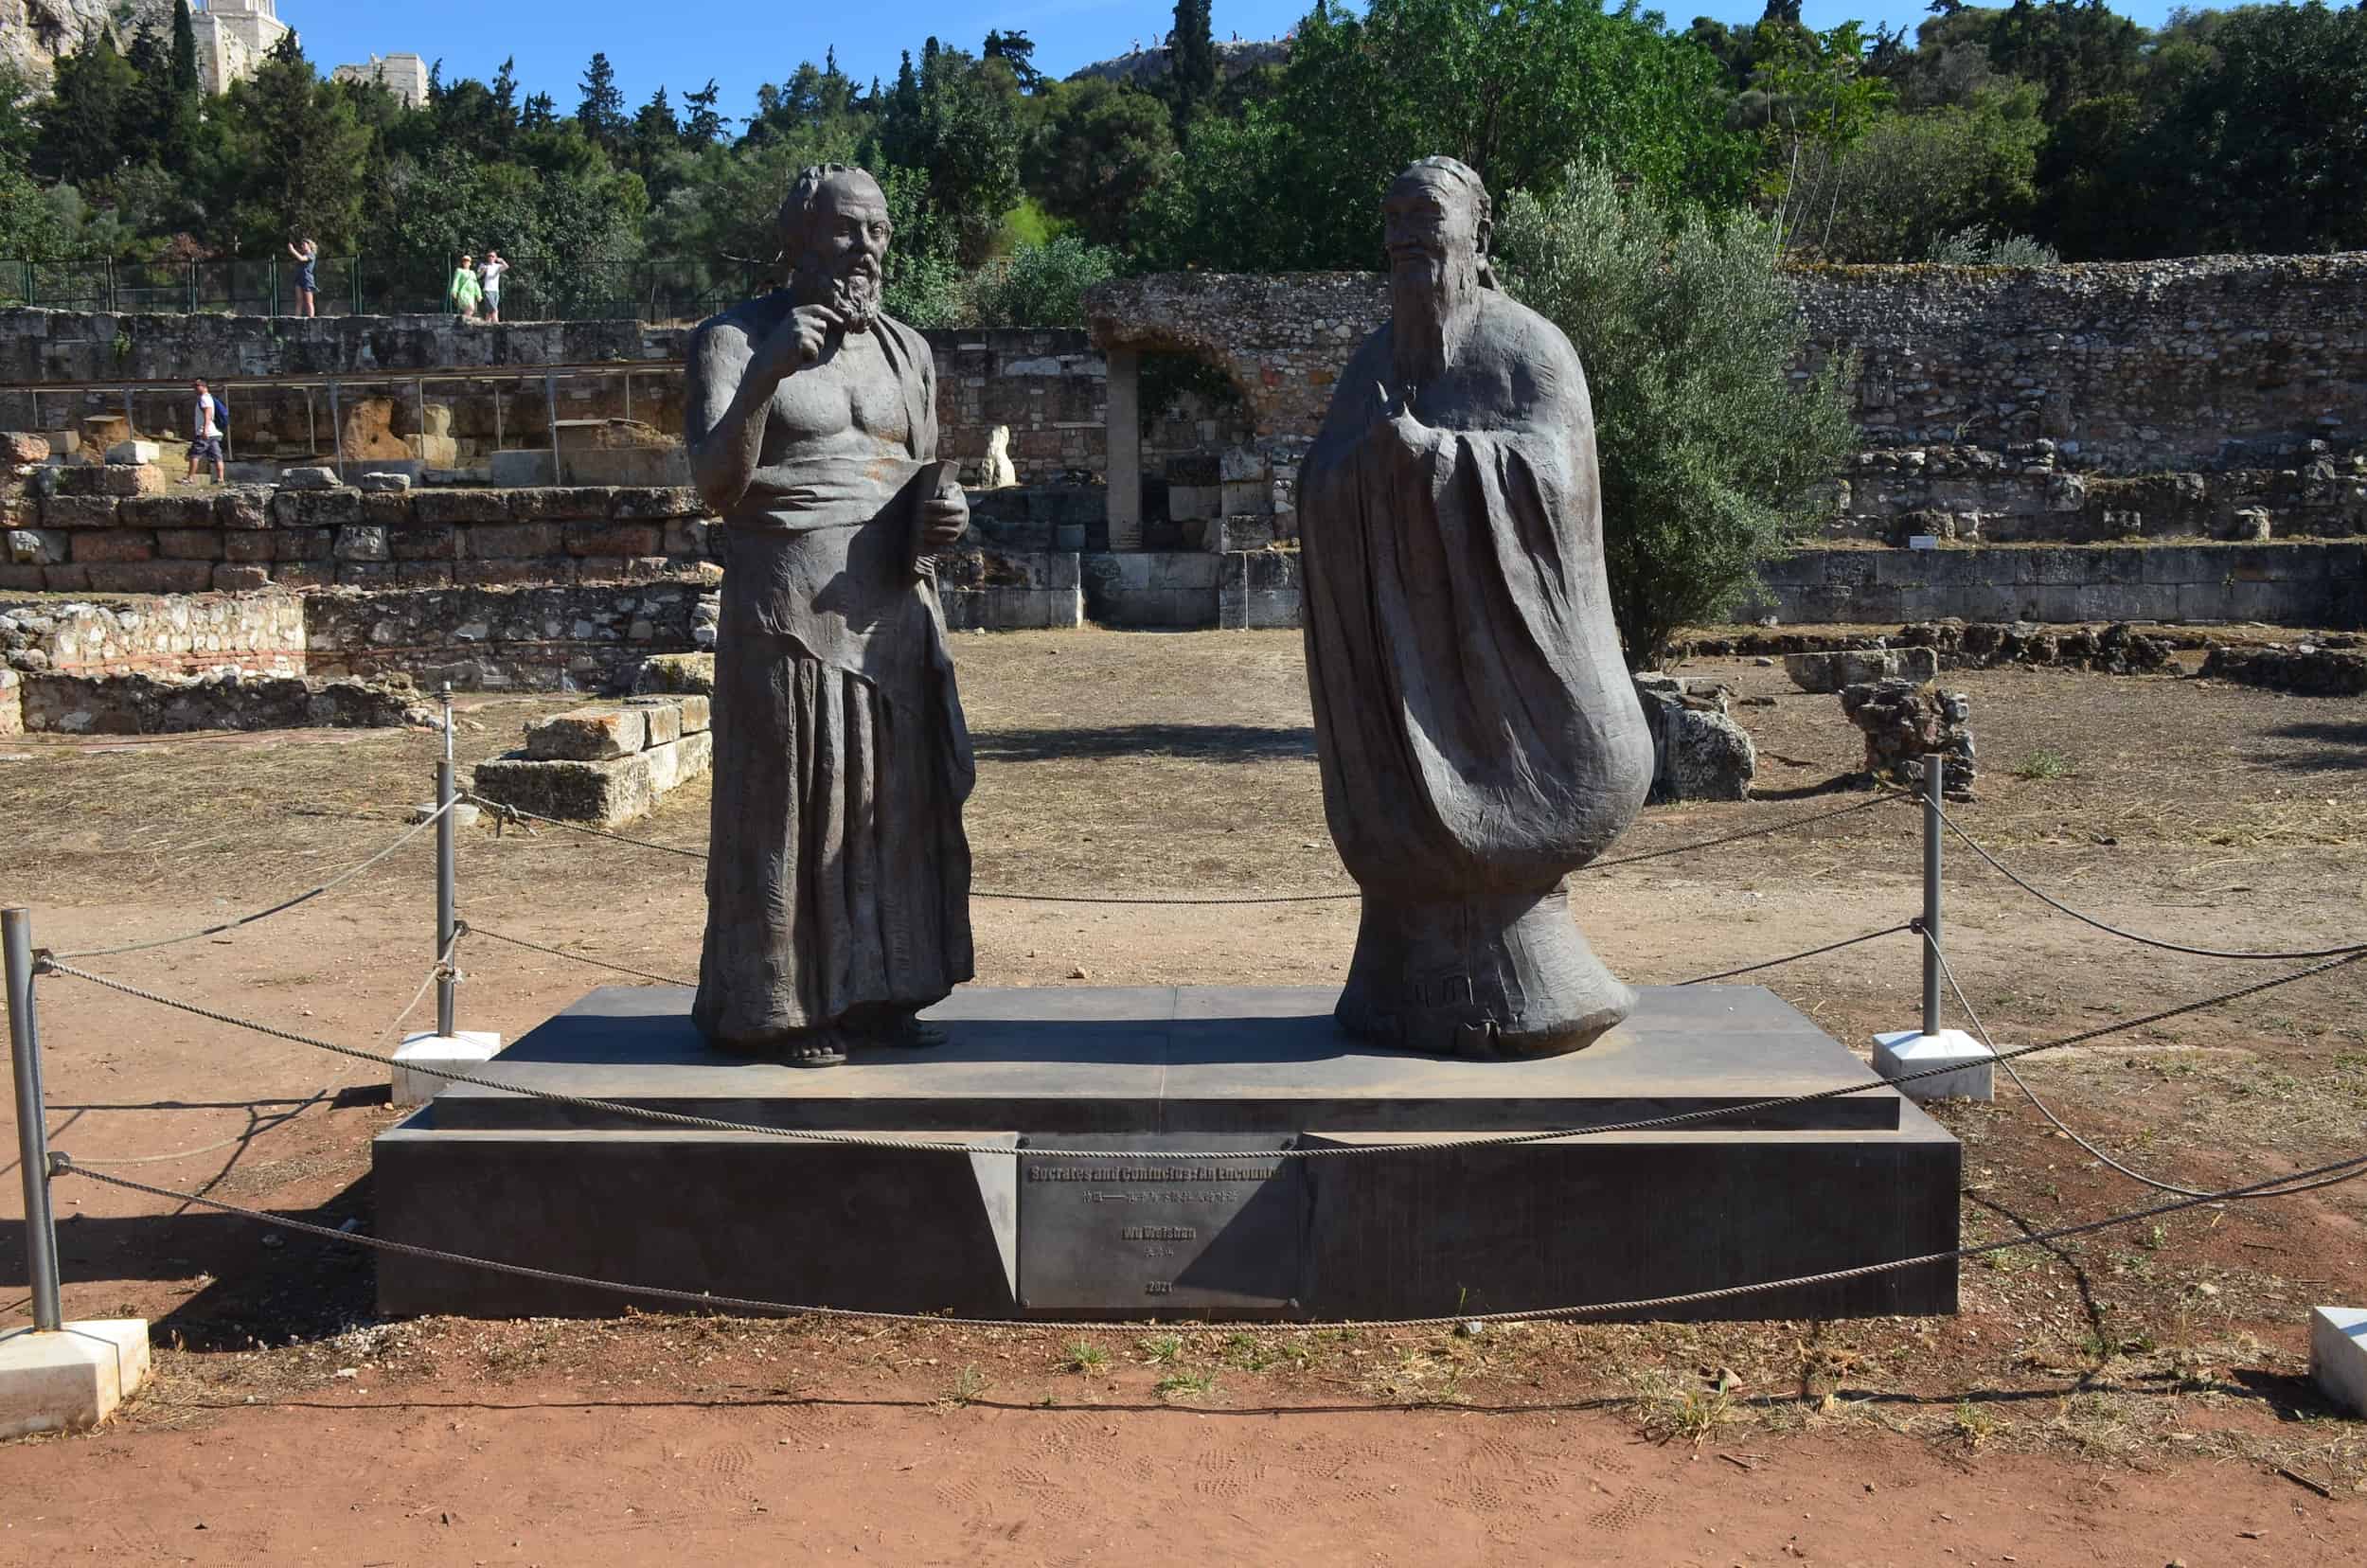 Socrates and Confucius: An Encounter by Wu Weishan, 2021 in the South Square of the Ancient Agora of Athens